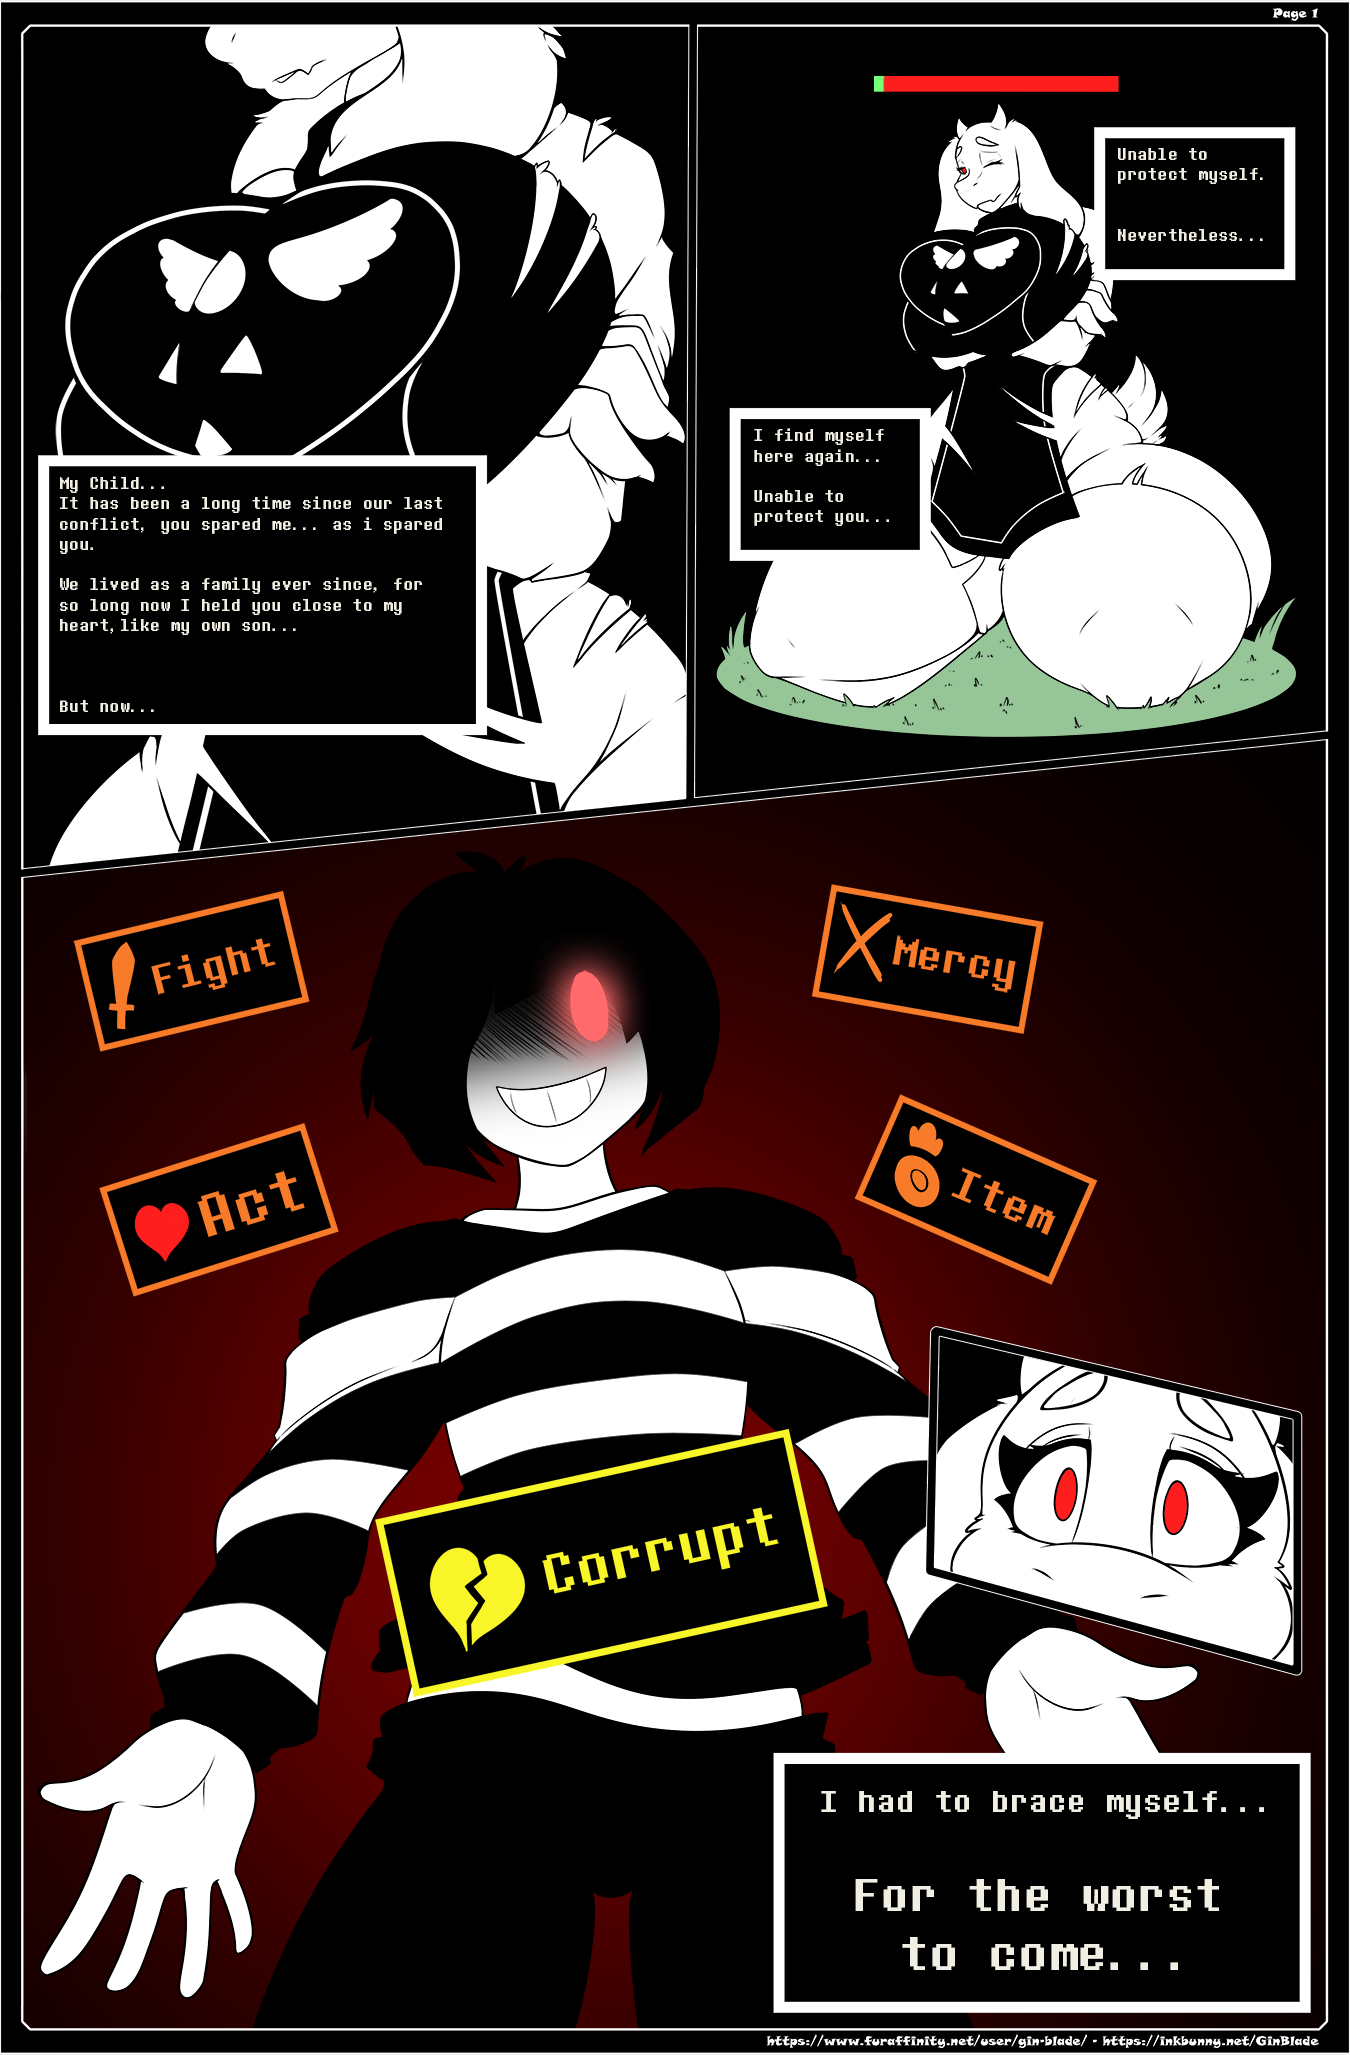 1504645030.gin-blade_undertale-corruption_route-page_1.png.